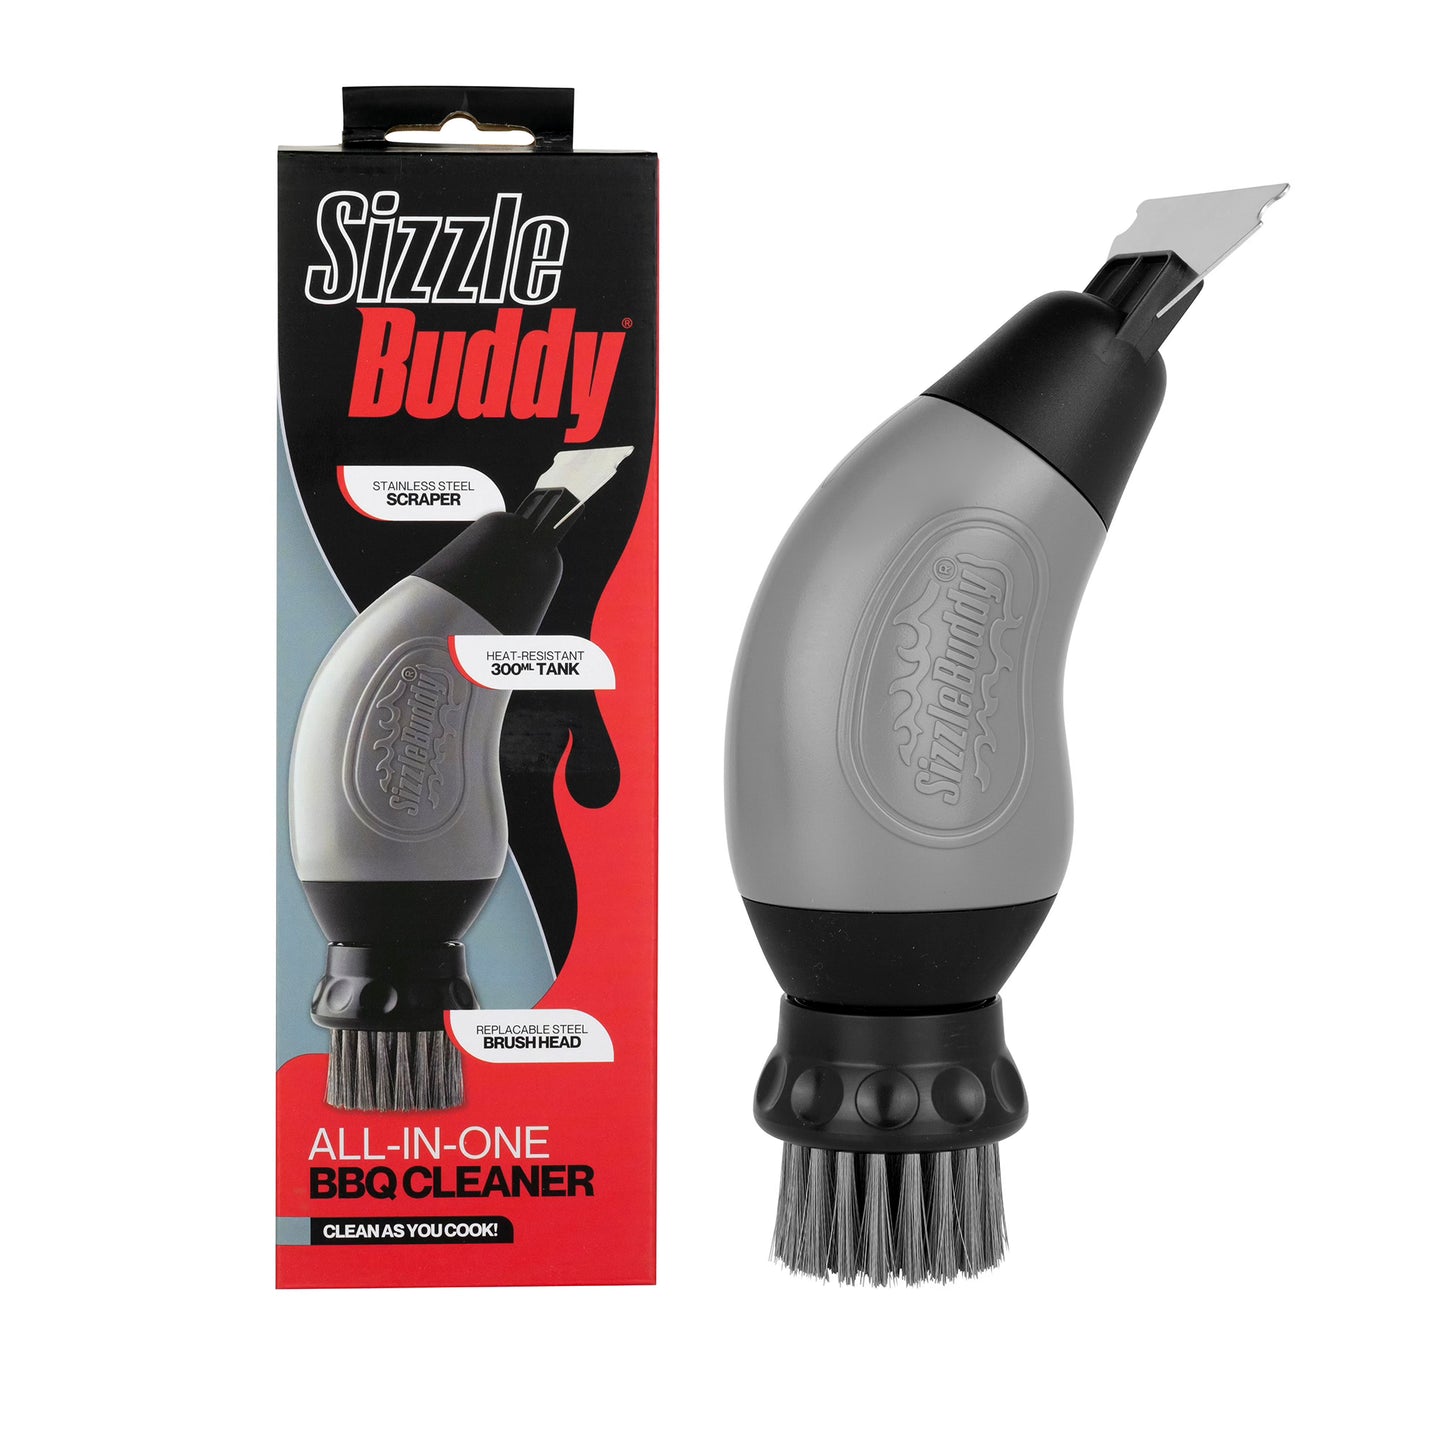 Sizzle Buddy 2.0 - The Ultimate BBQ Cleaner